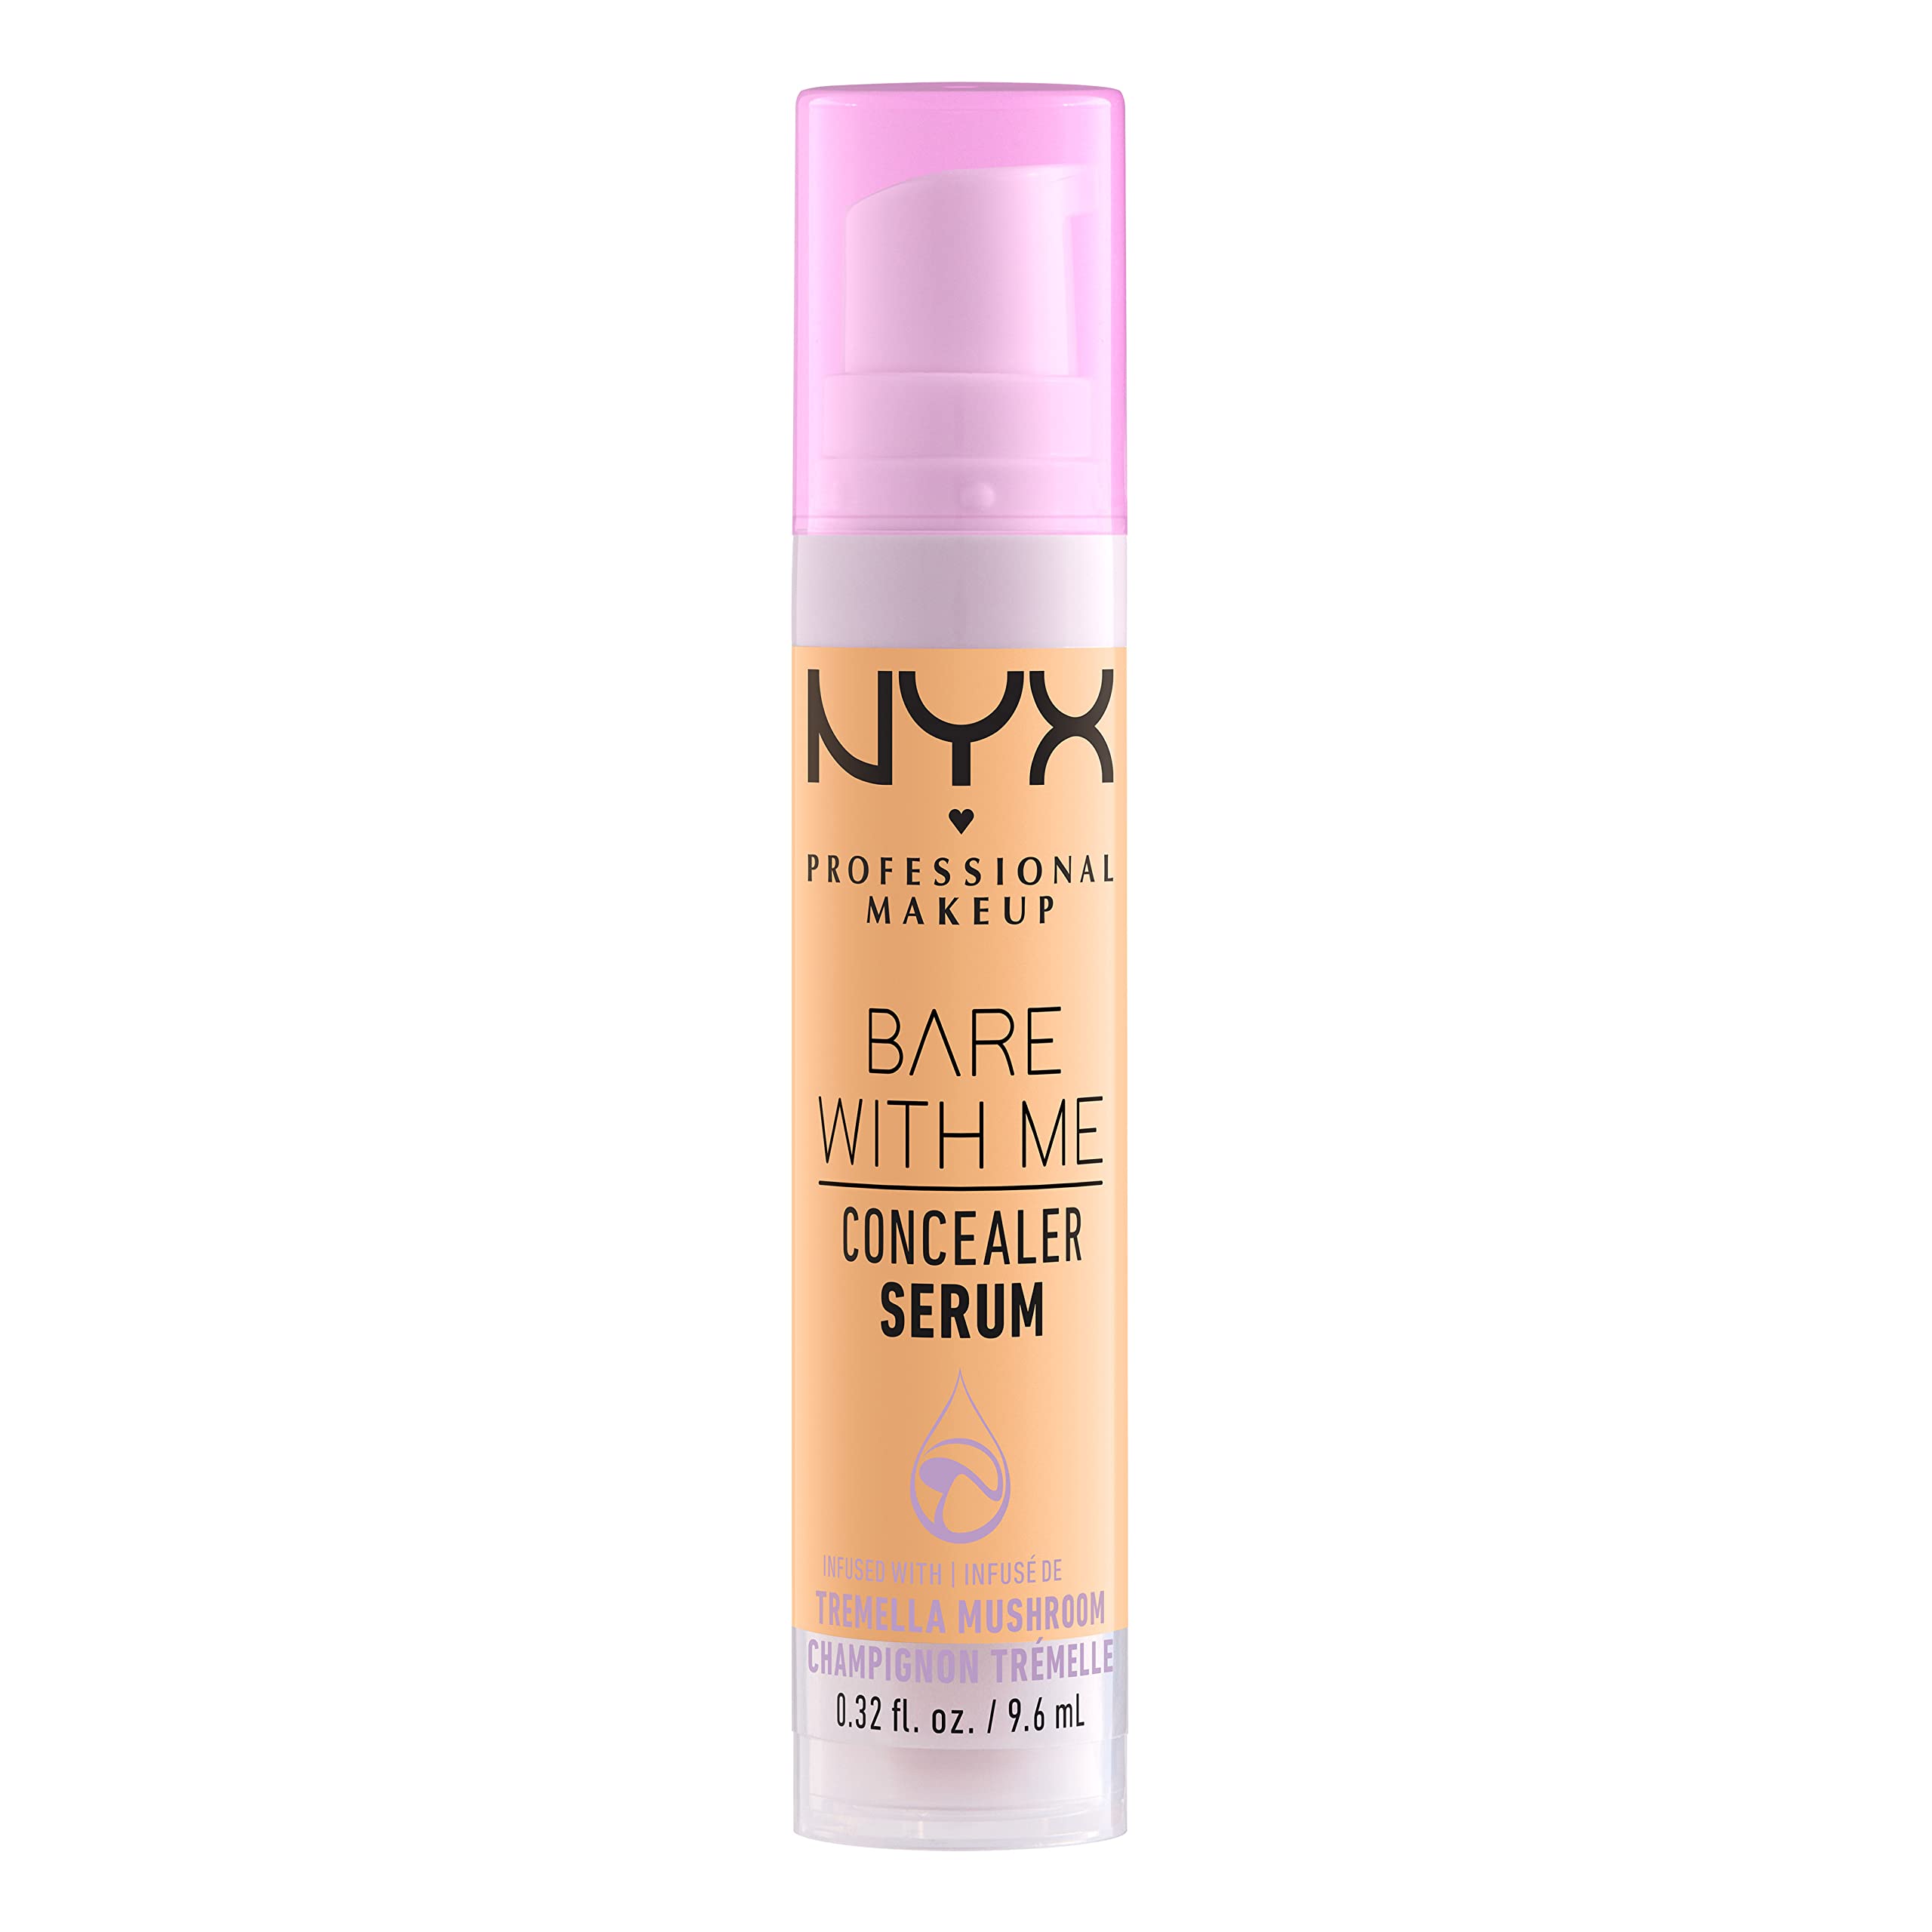 NYX PROFESSIONAL MAKEUP Bare With Me Concealer Serum, Up To 24Hr Hydration - Golden